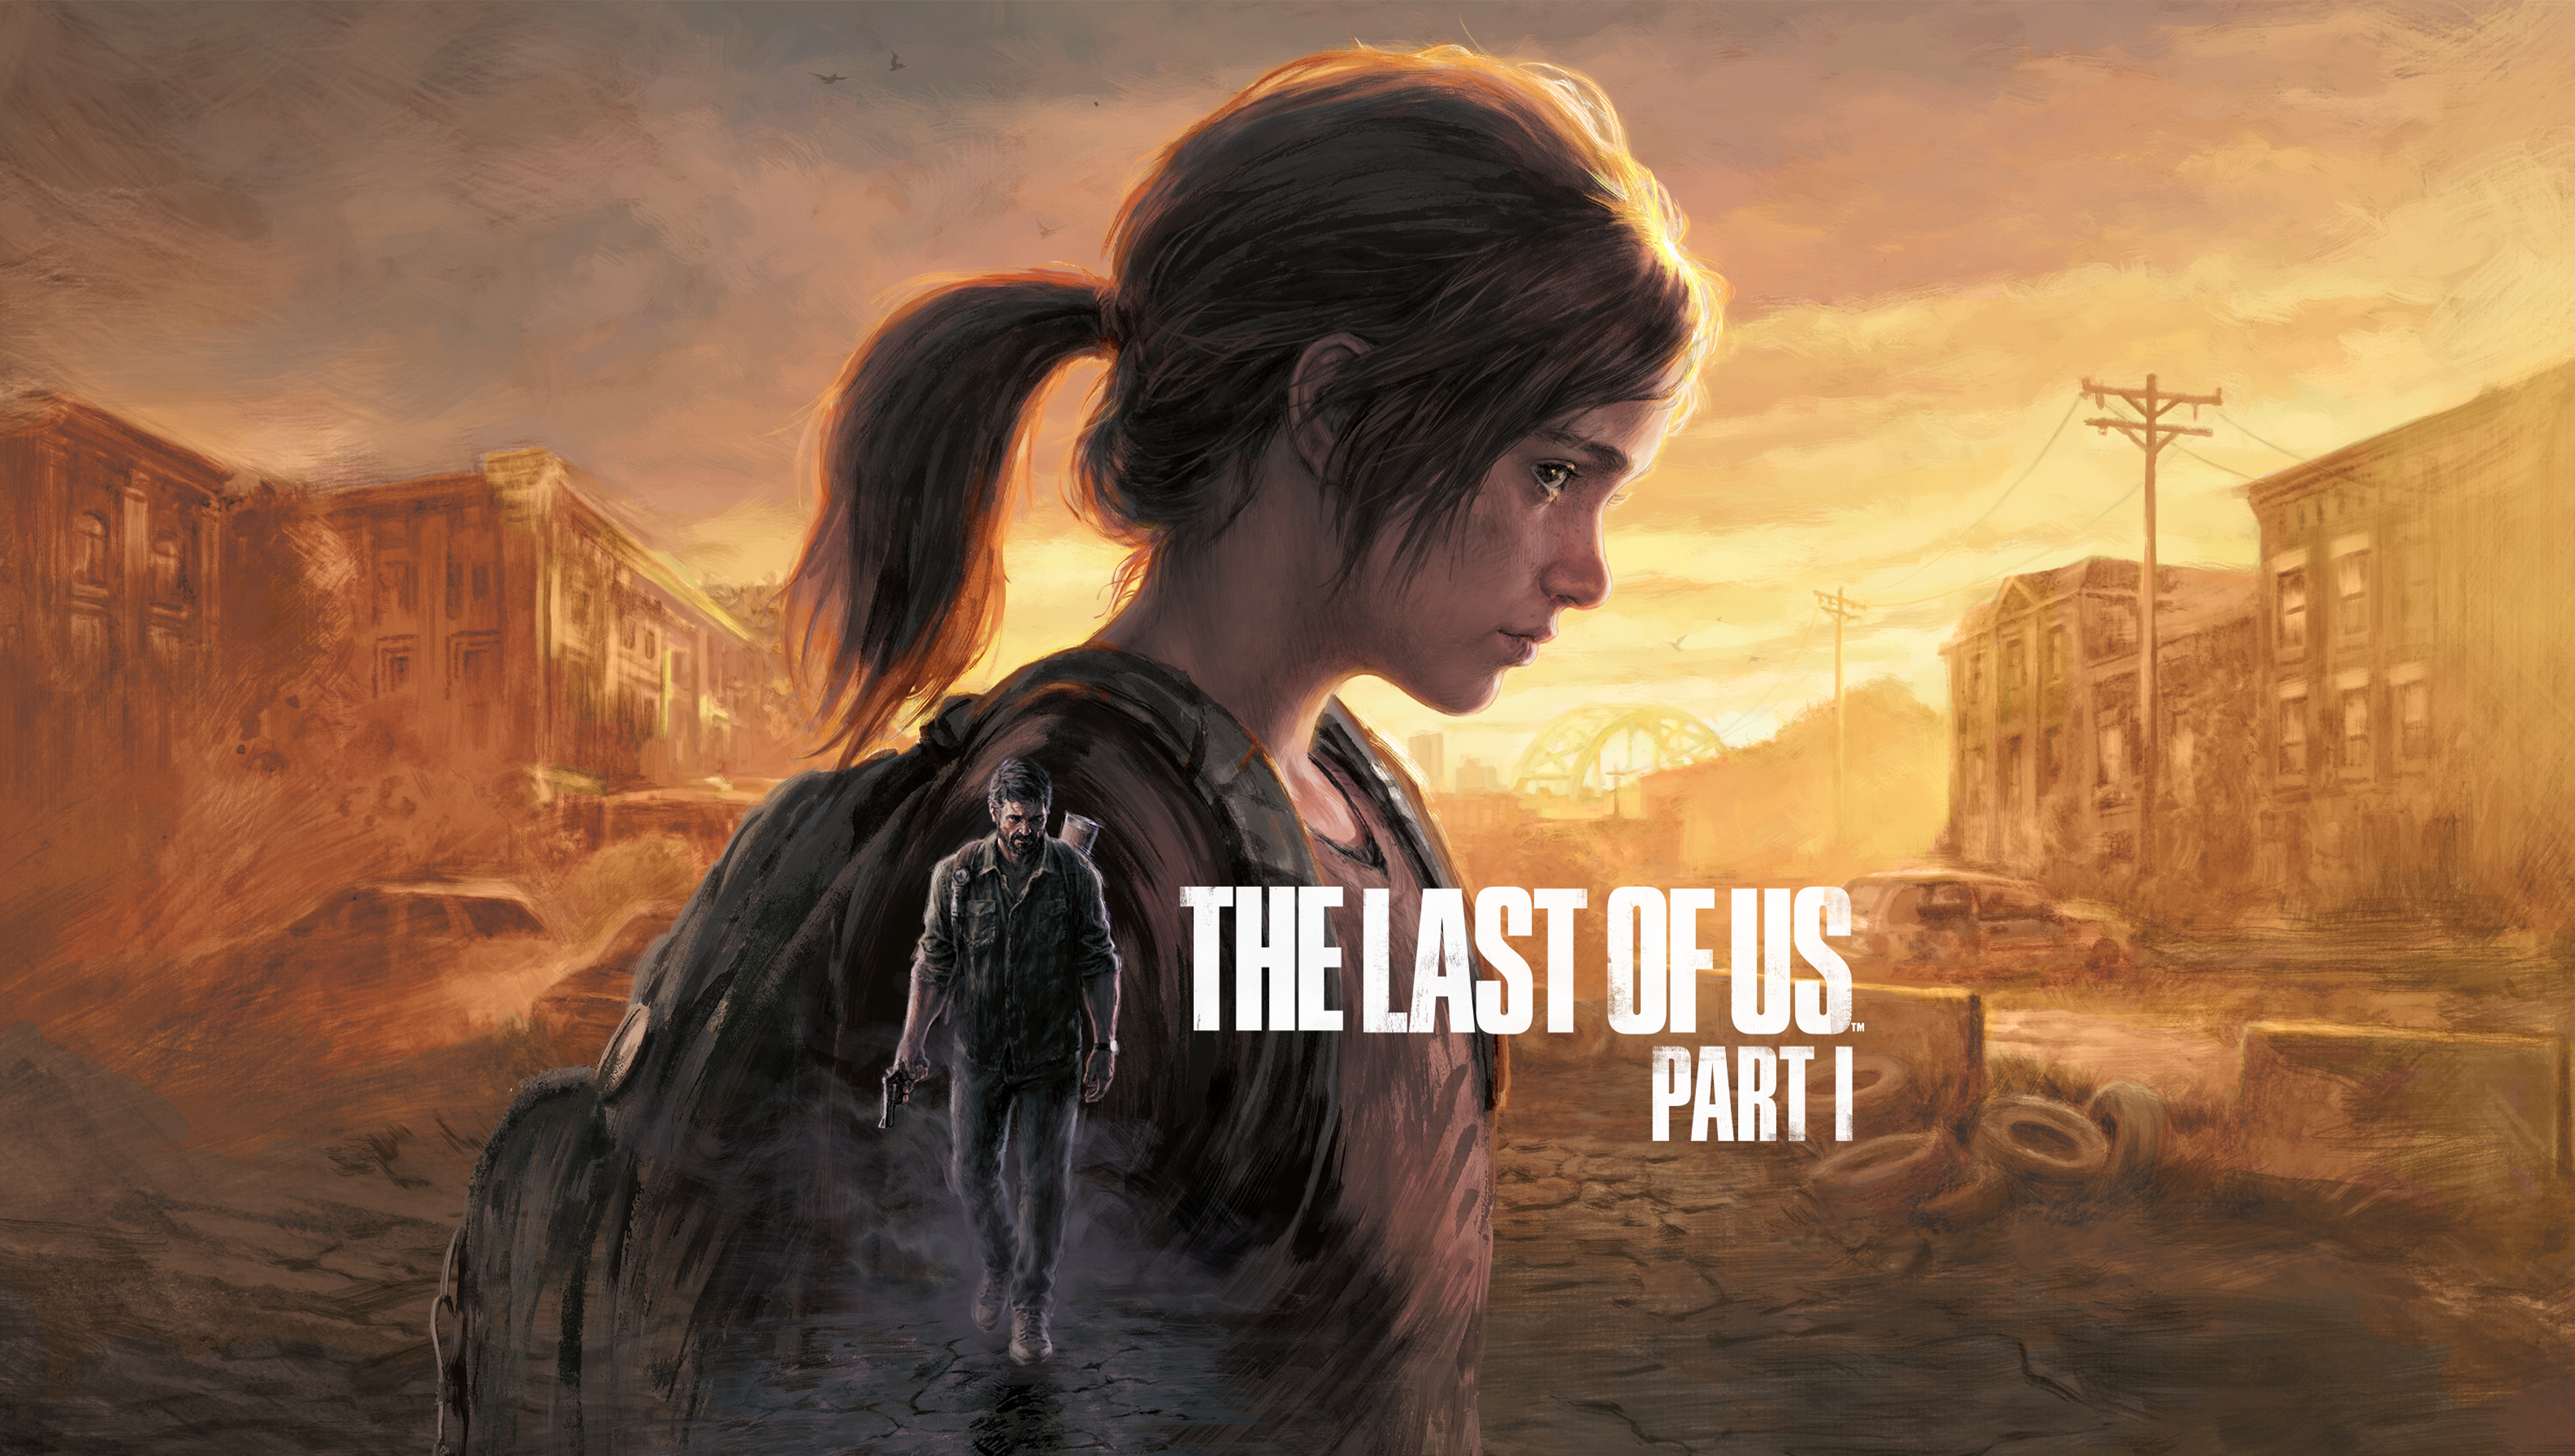 How Naughty Dog rebuilt The Last of Us Part I